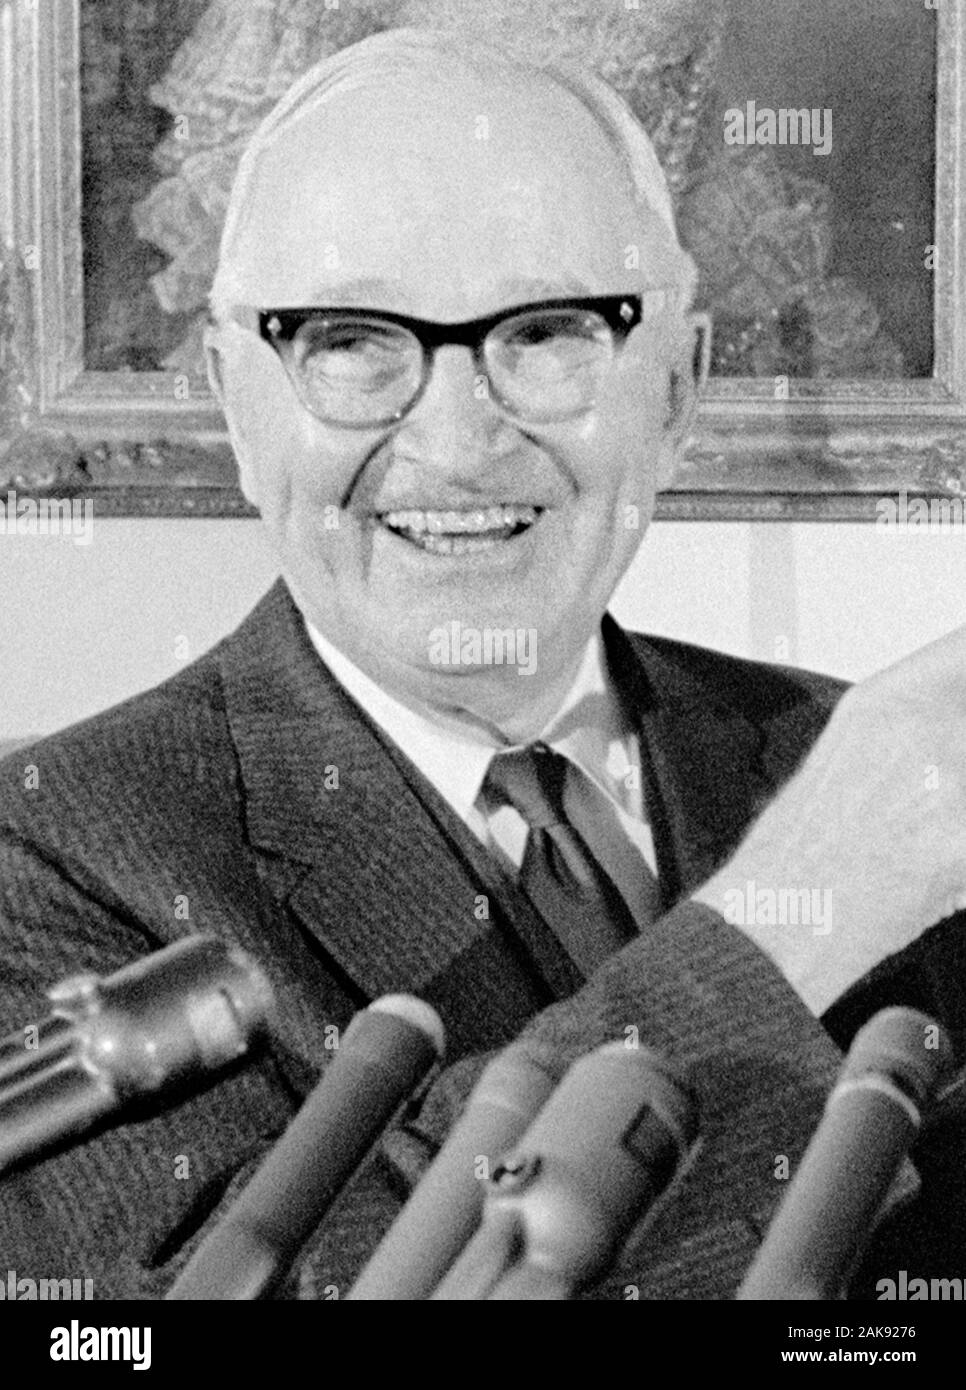 Vintage photo of Harry S Truman (1884 – 1972) - the 33rd US President (1945 – 1953). Photo by Warren K Leffler taken on May 7 1964, the day before Truman’s 80th birthday. Stock Photo